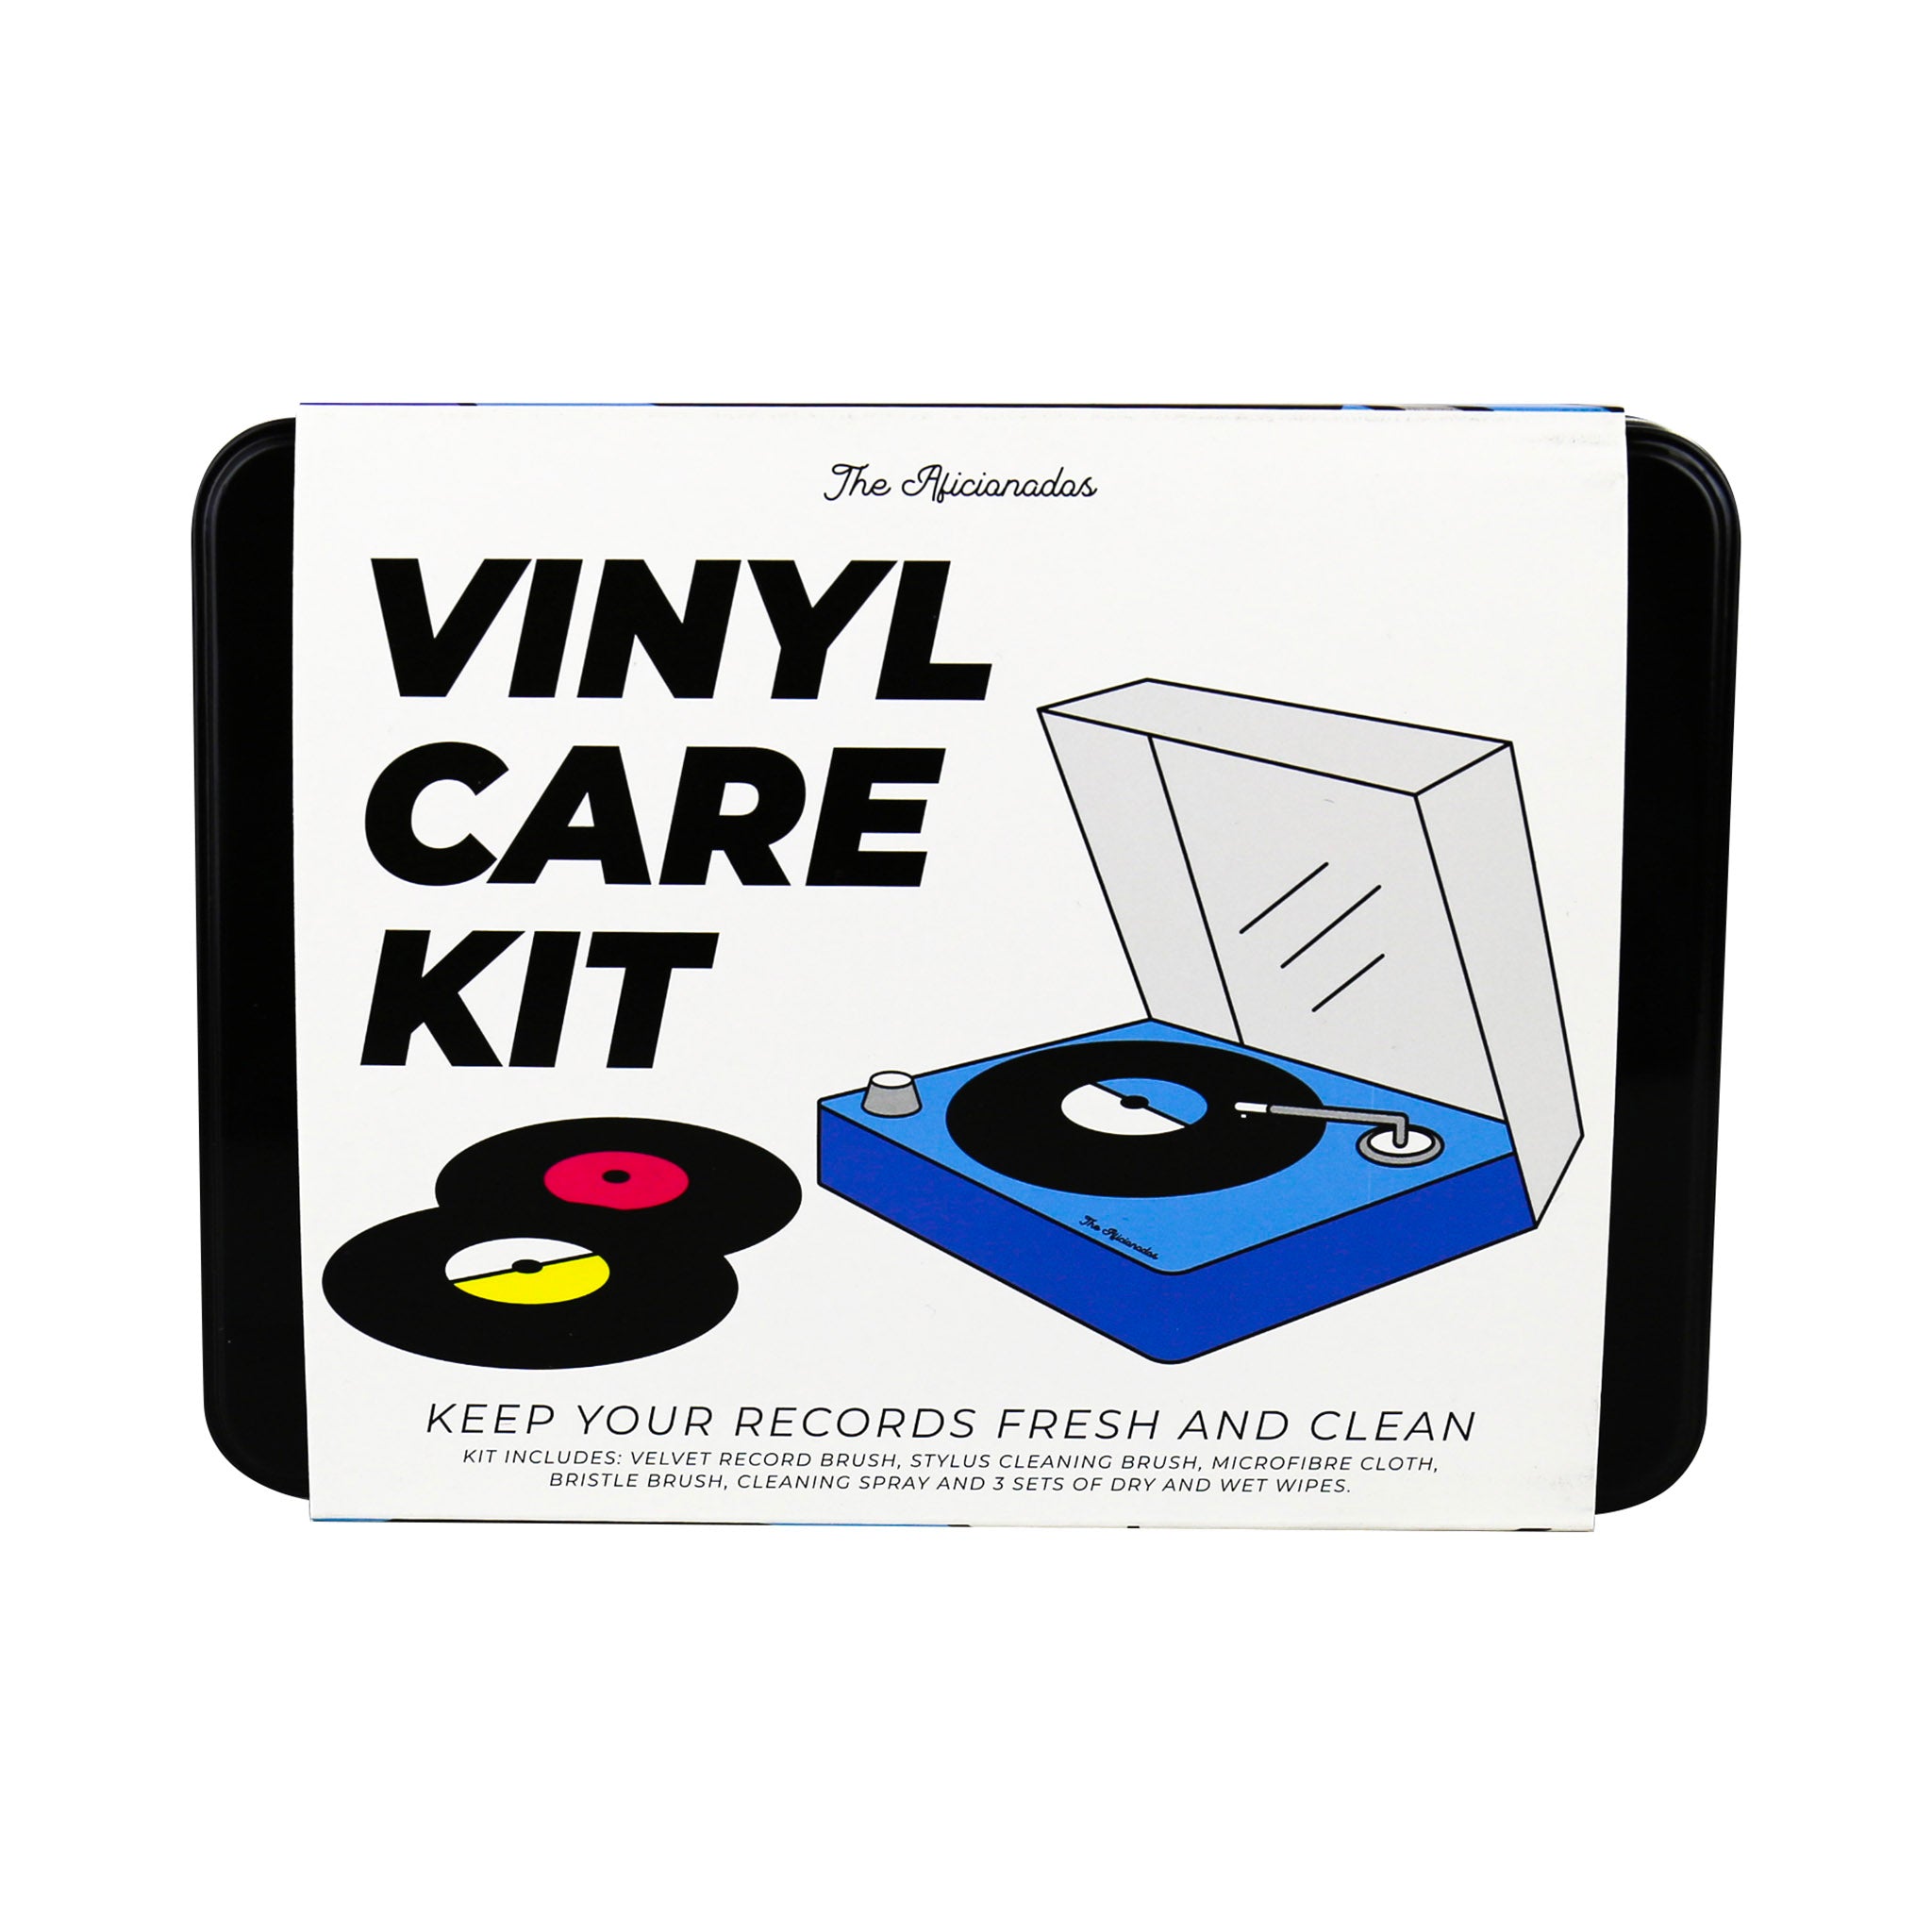 Turntable cleaning kit / gift boxes